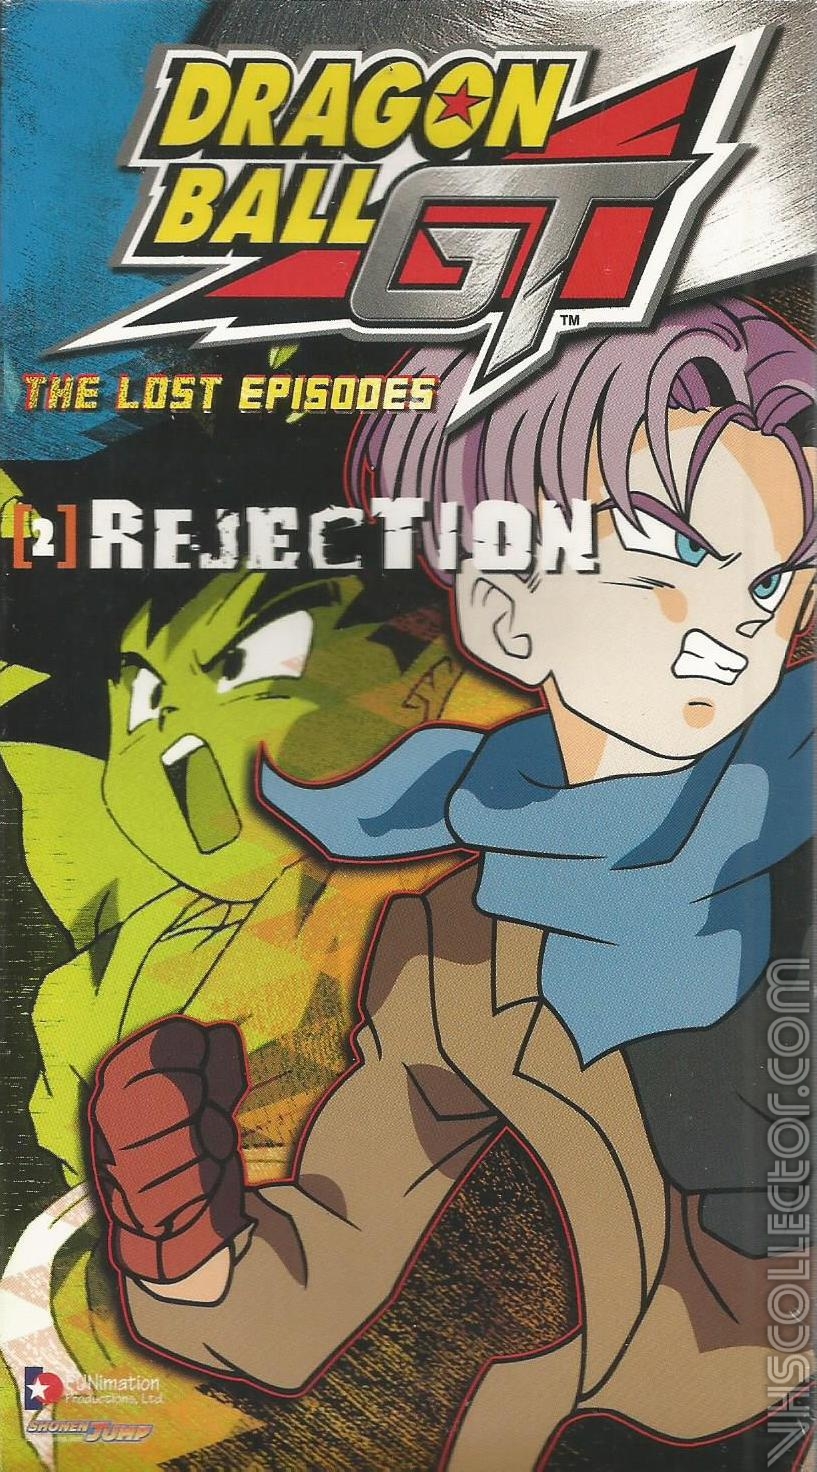 Dragon Ball GT - The Lost Episodes DVD Box Set Review